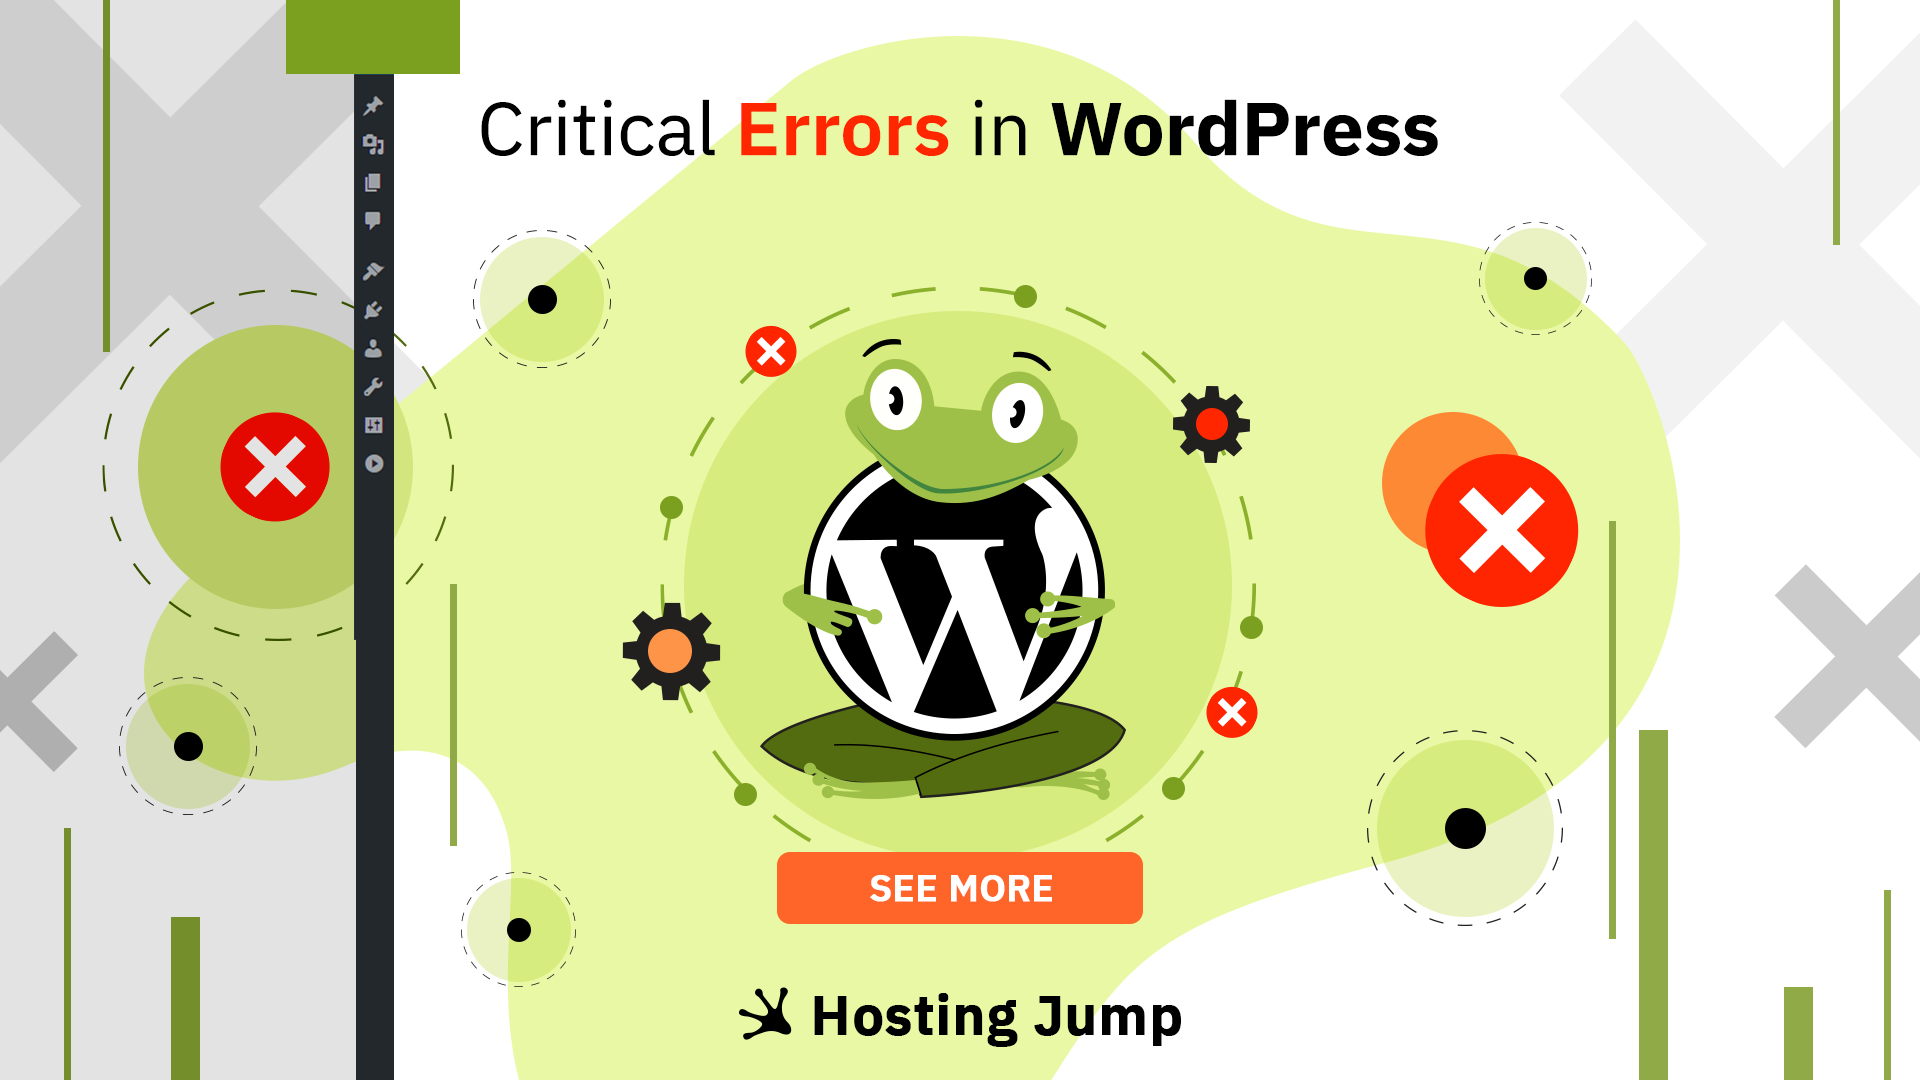 WordPress: There Has Been a Critical Error on This Website - Fixes and Solutions